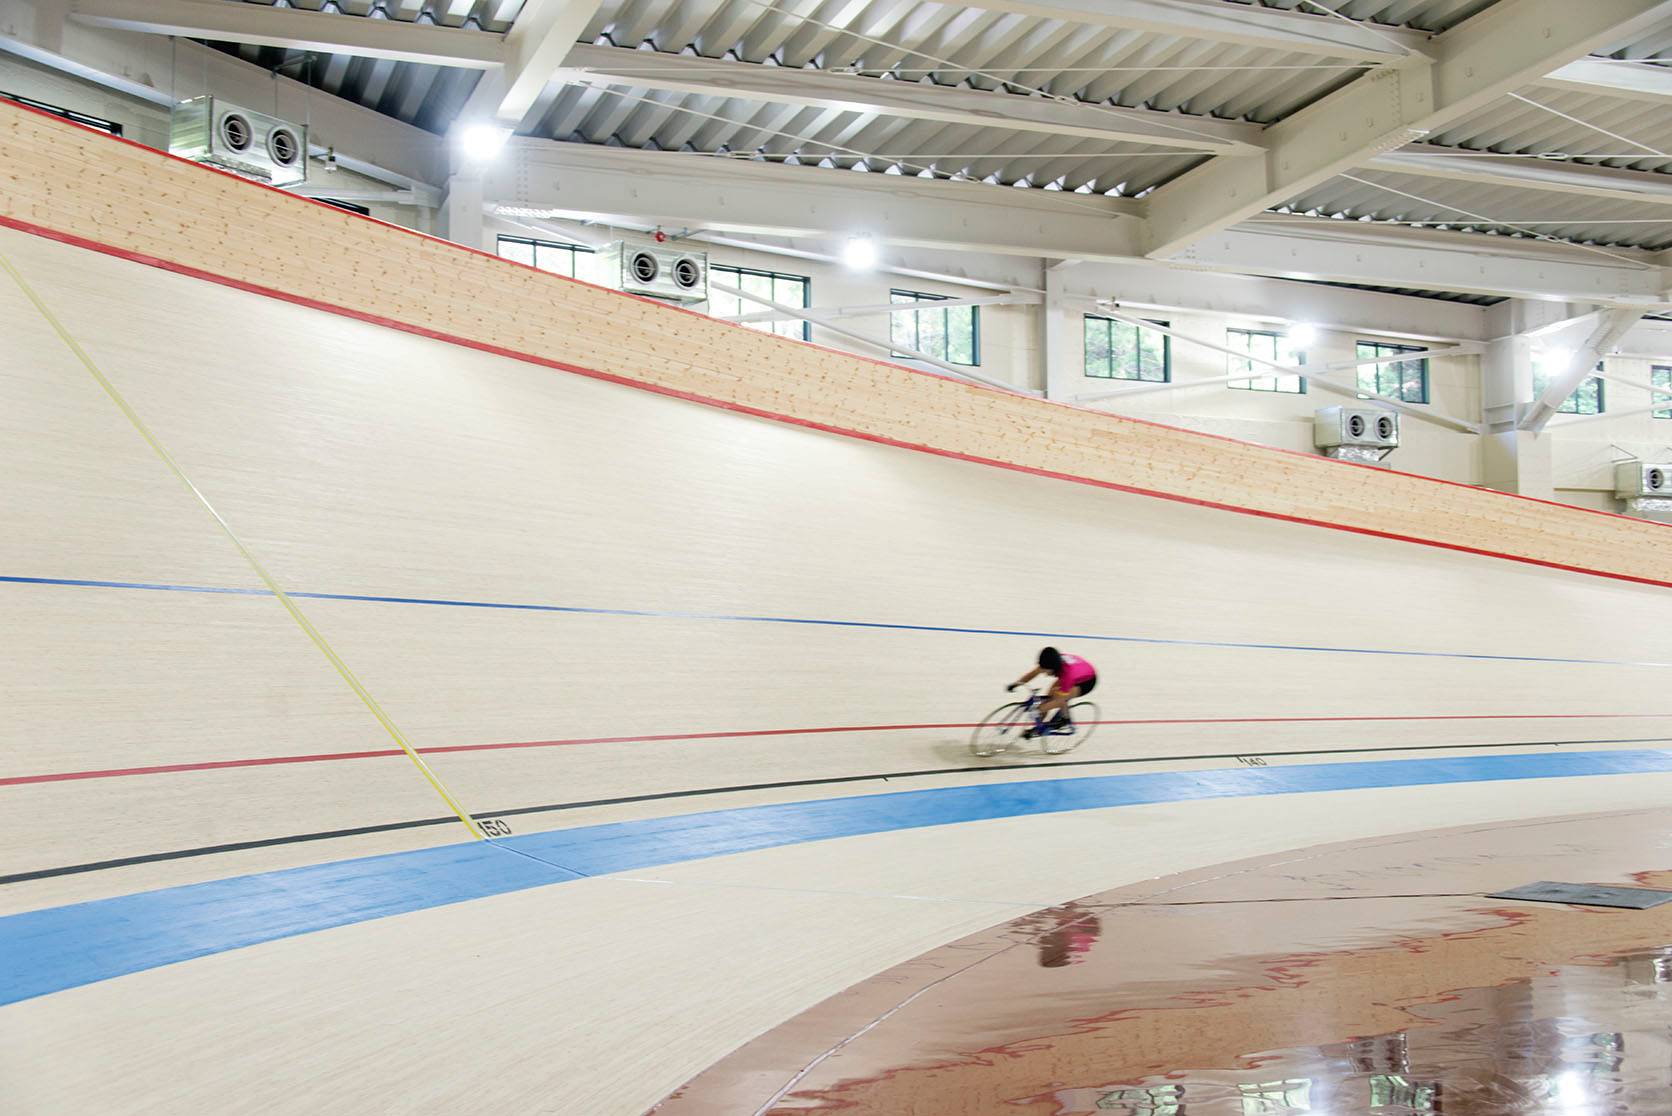 A keirin rider cycles around the bend of the velodrome inside Japan's only keirin school in the city of Izu, Shizuoka Prefecture, in August 2019. | ROB GILHOOLY